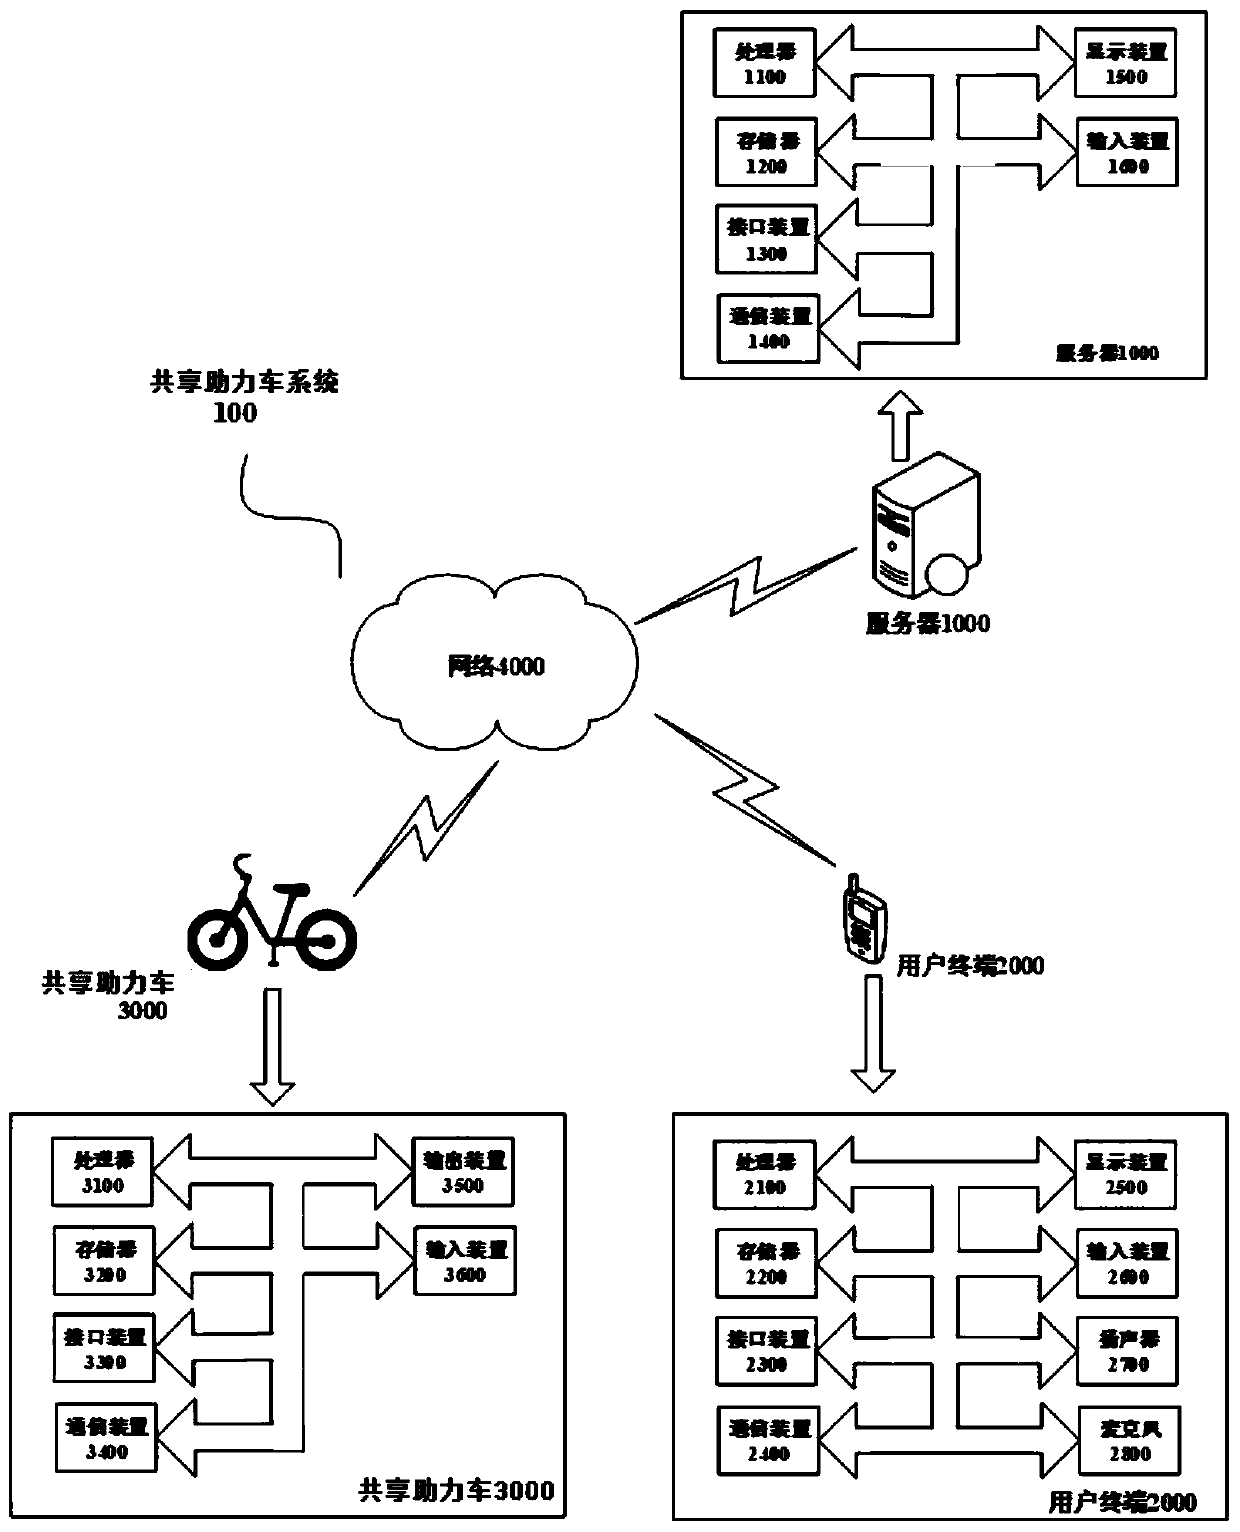 Control method of shared moped and shared moped